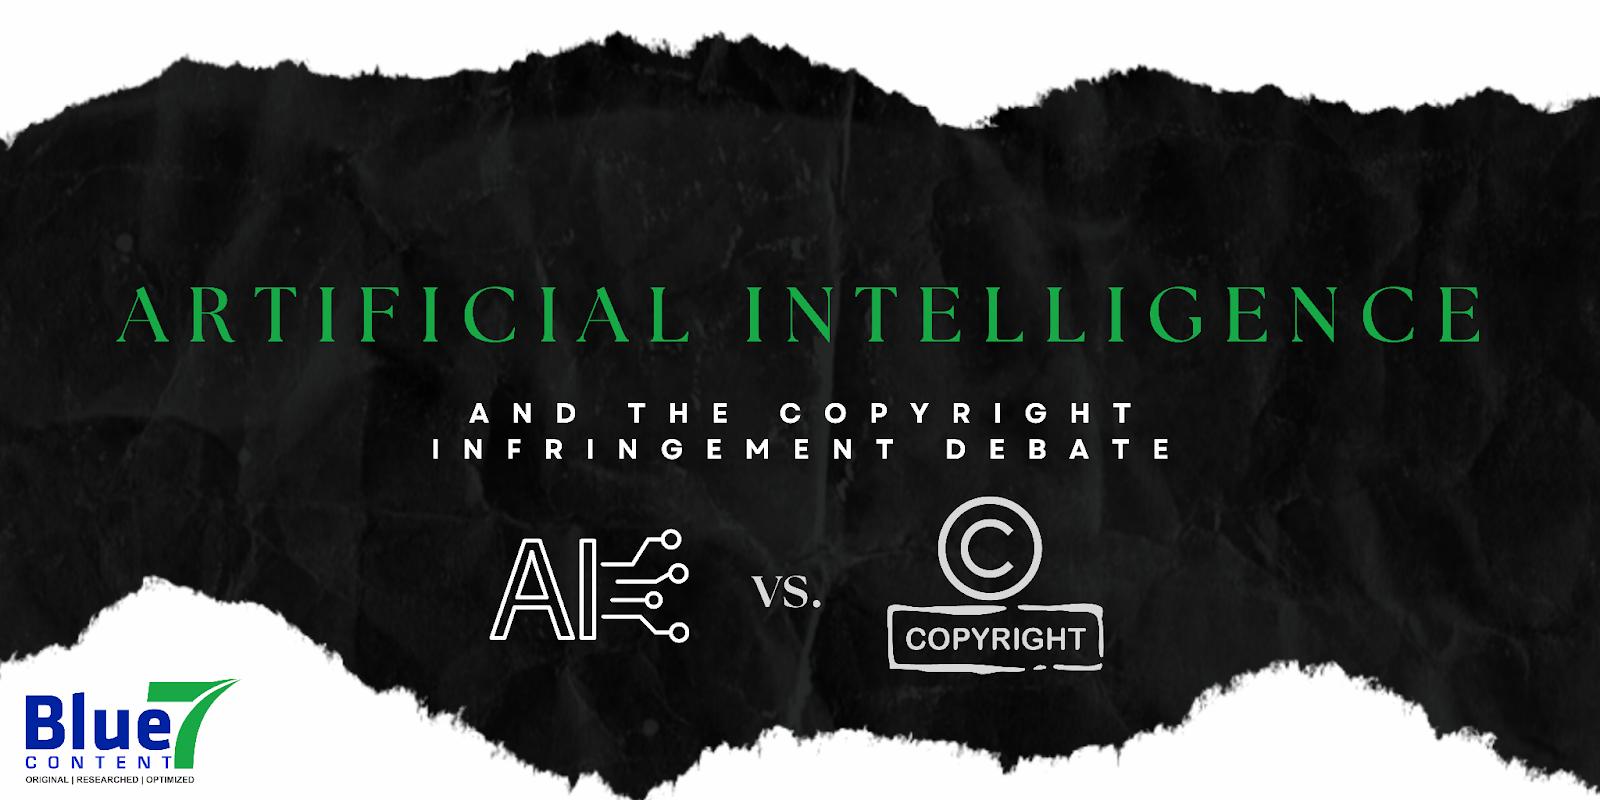 The field of law surrounding AI is in its infancy, and copyright issues are at the forefront of discussion.